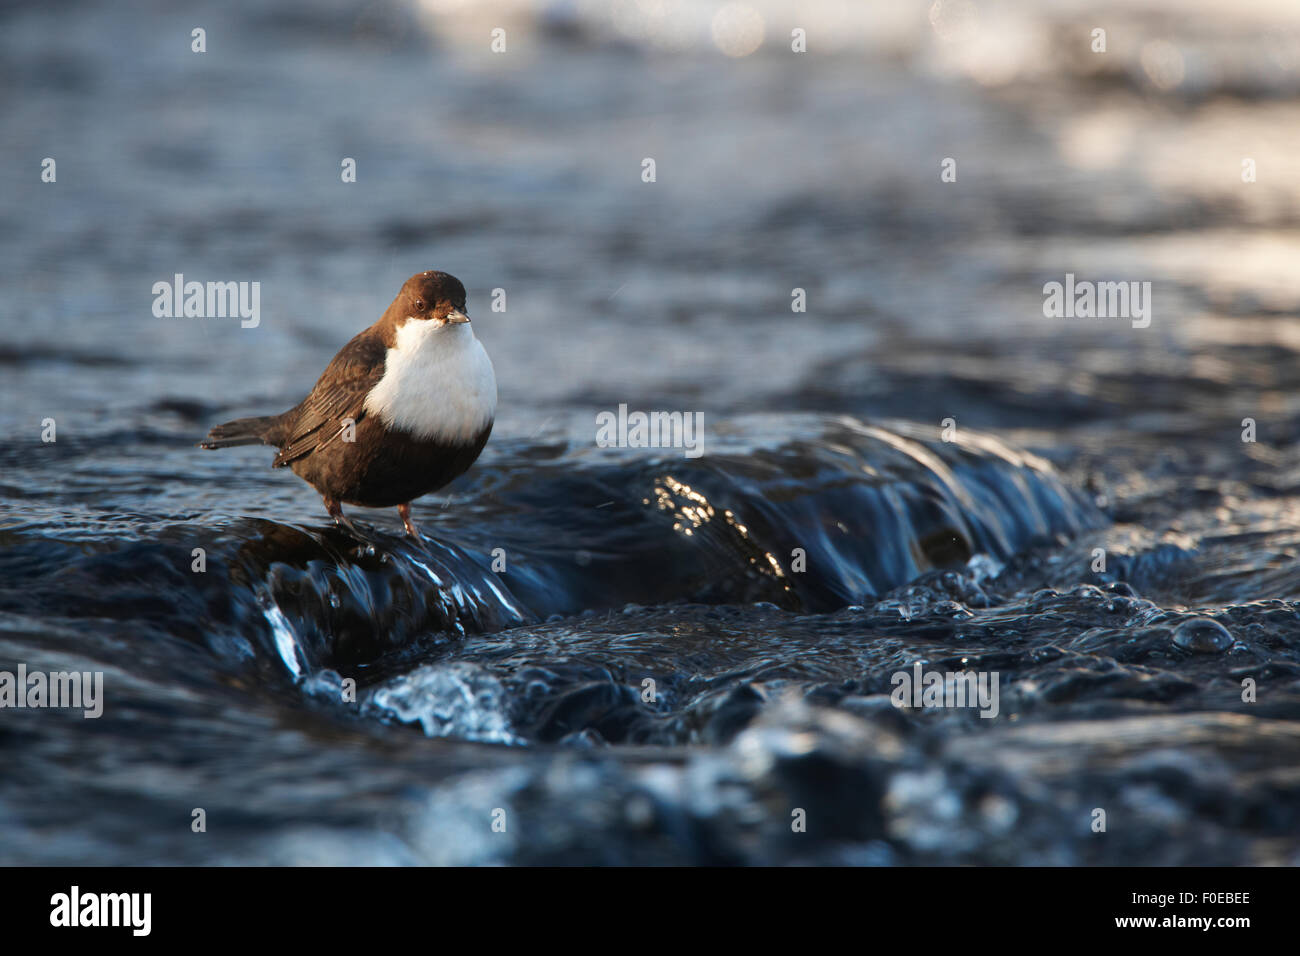 White-throated dipper (Cinclus cinclus) standing in shallow water, Kitkajoki River, Finland, February 2009 Stock Photo